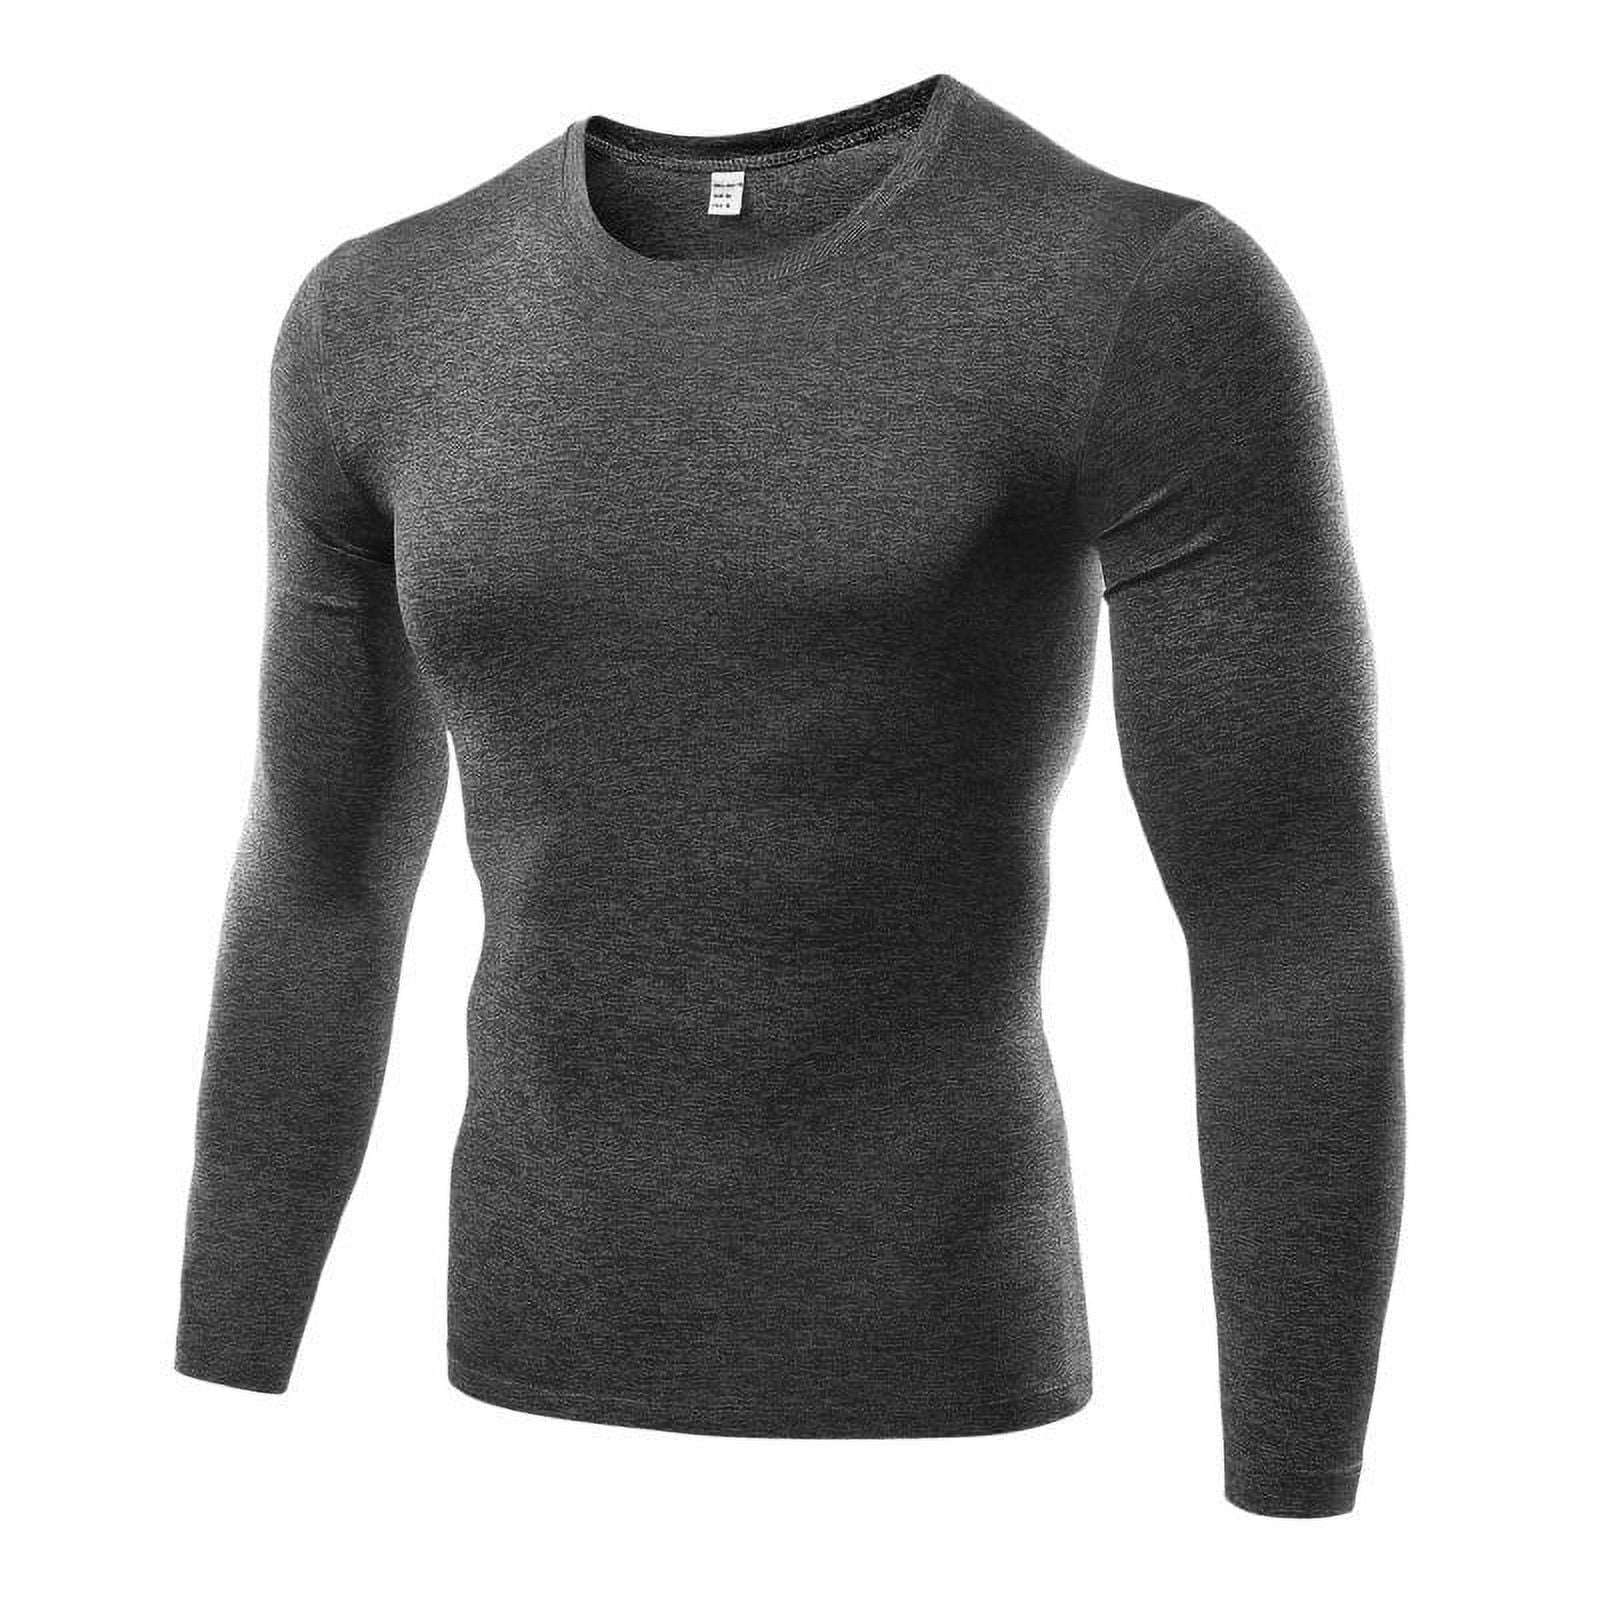 Dsseng Quick Dry Long Sleeve Moisture Wicking Athletic Shirts Men‘s Dry ...